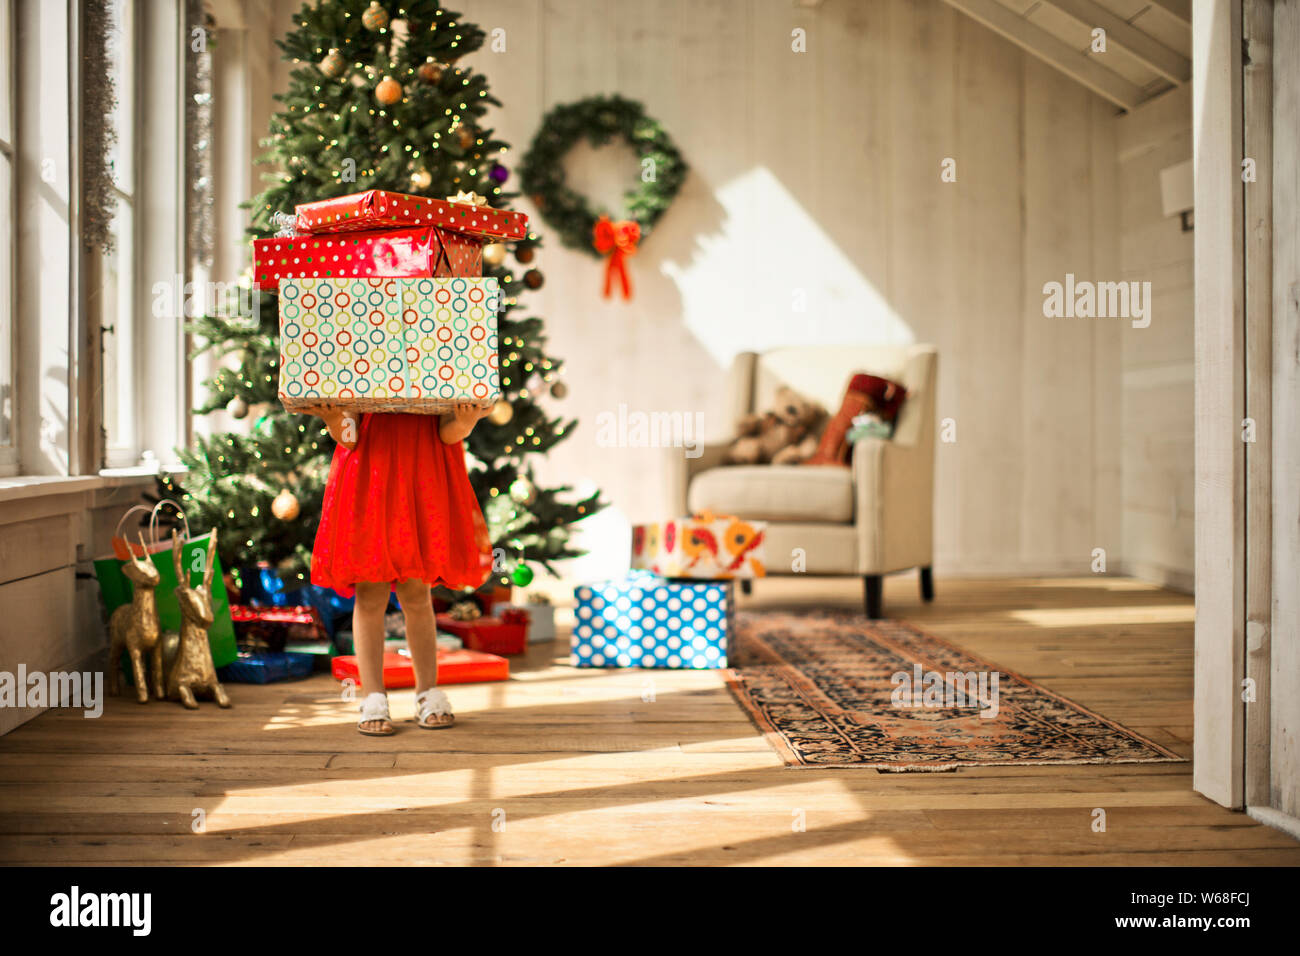 Young girl carrying a stack of Christmas presents. Stock Photo